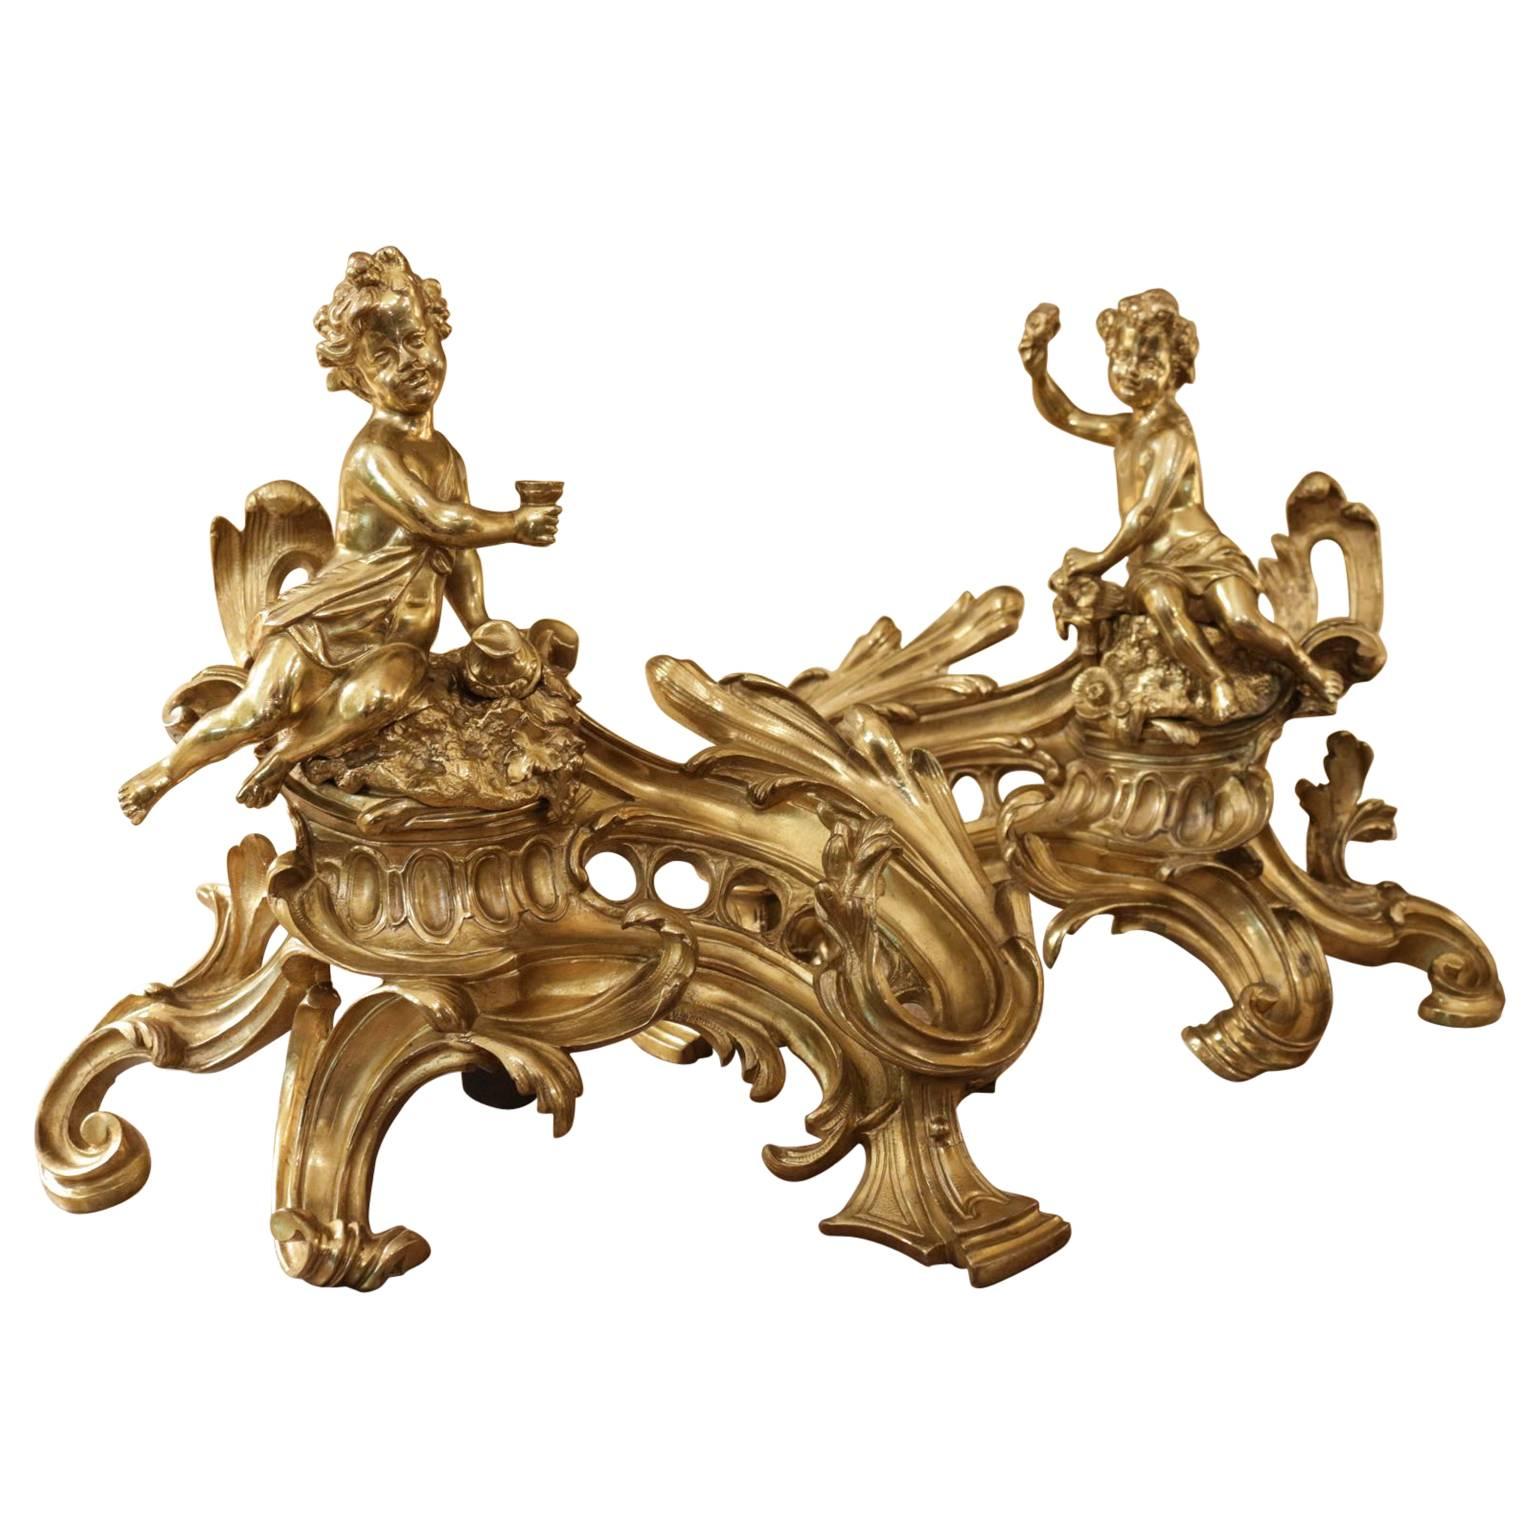 Pair of French Rococo Gilded Bronze Endiron with Putti, 19th Century